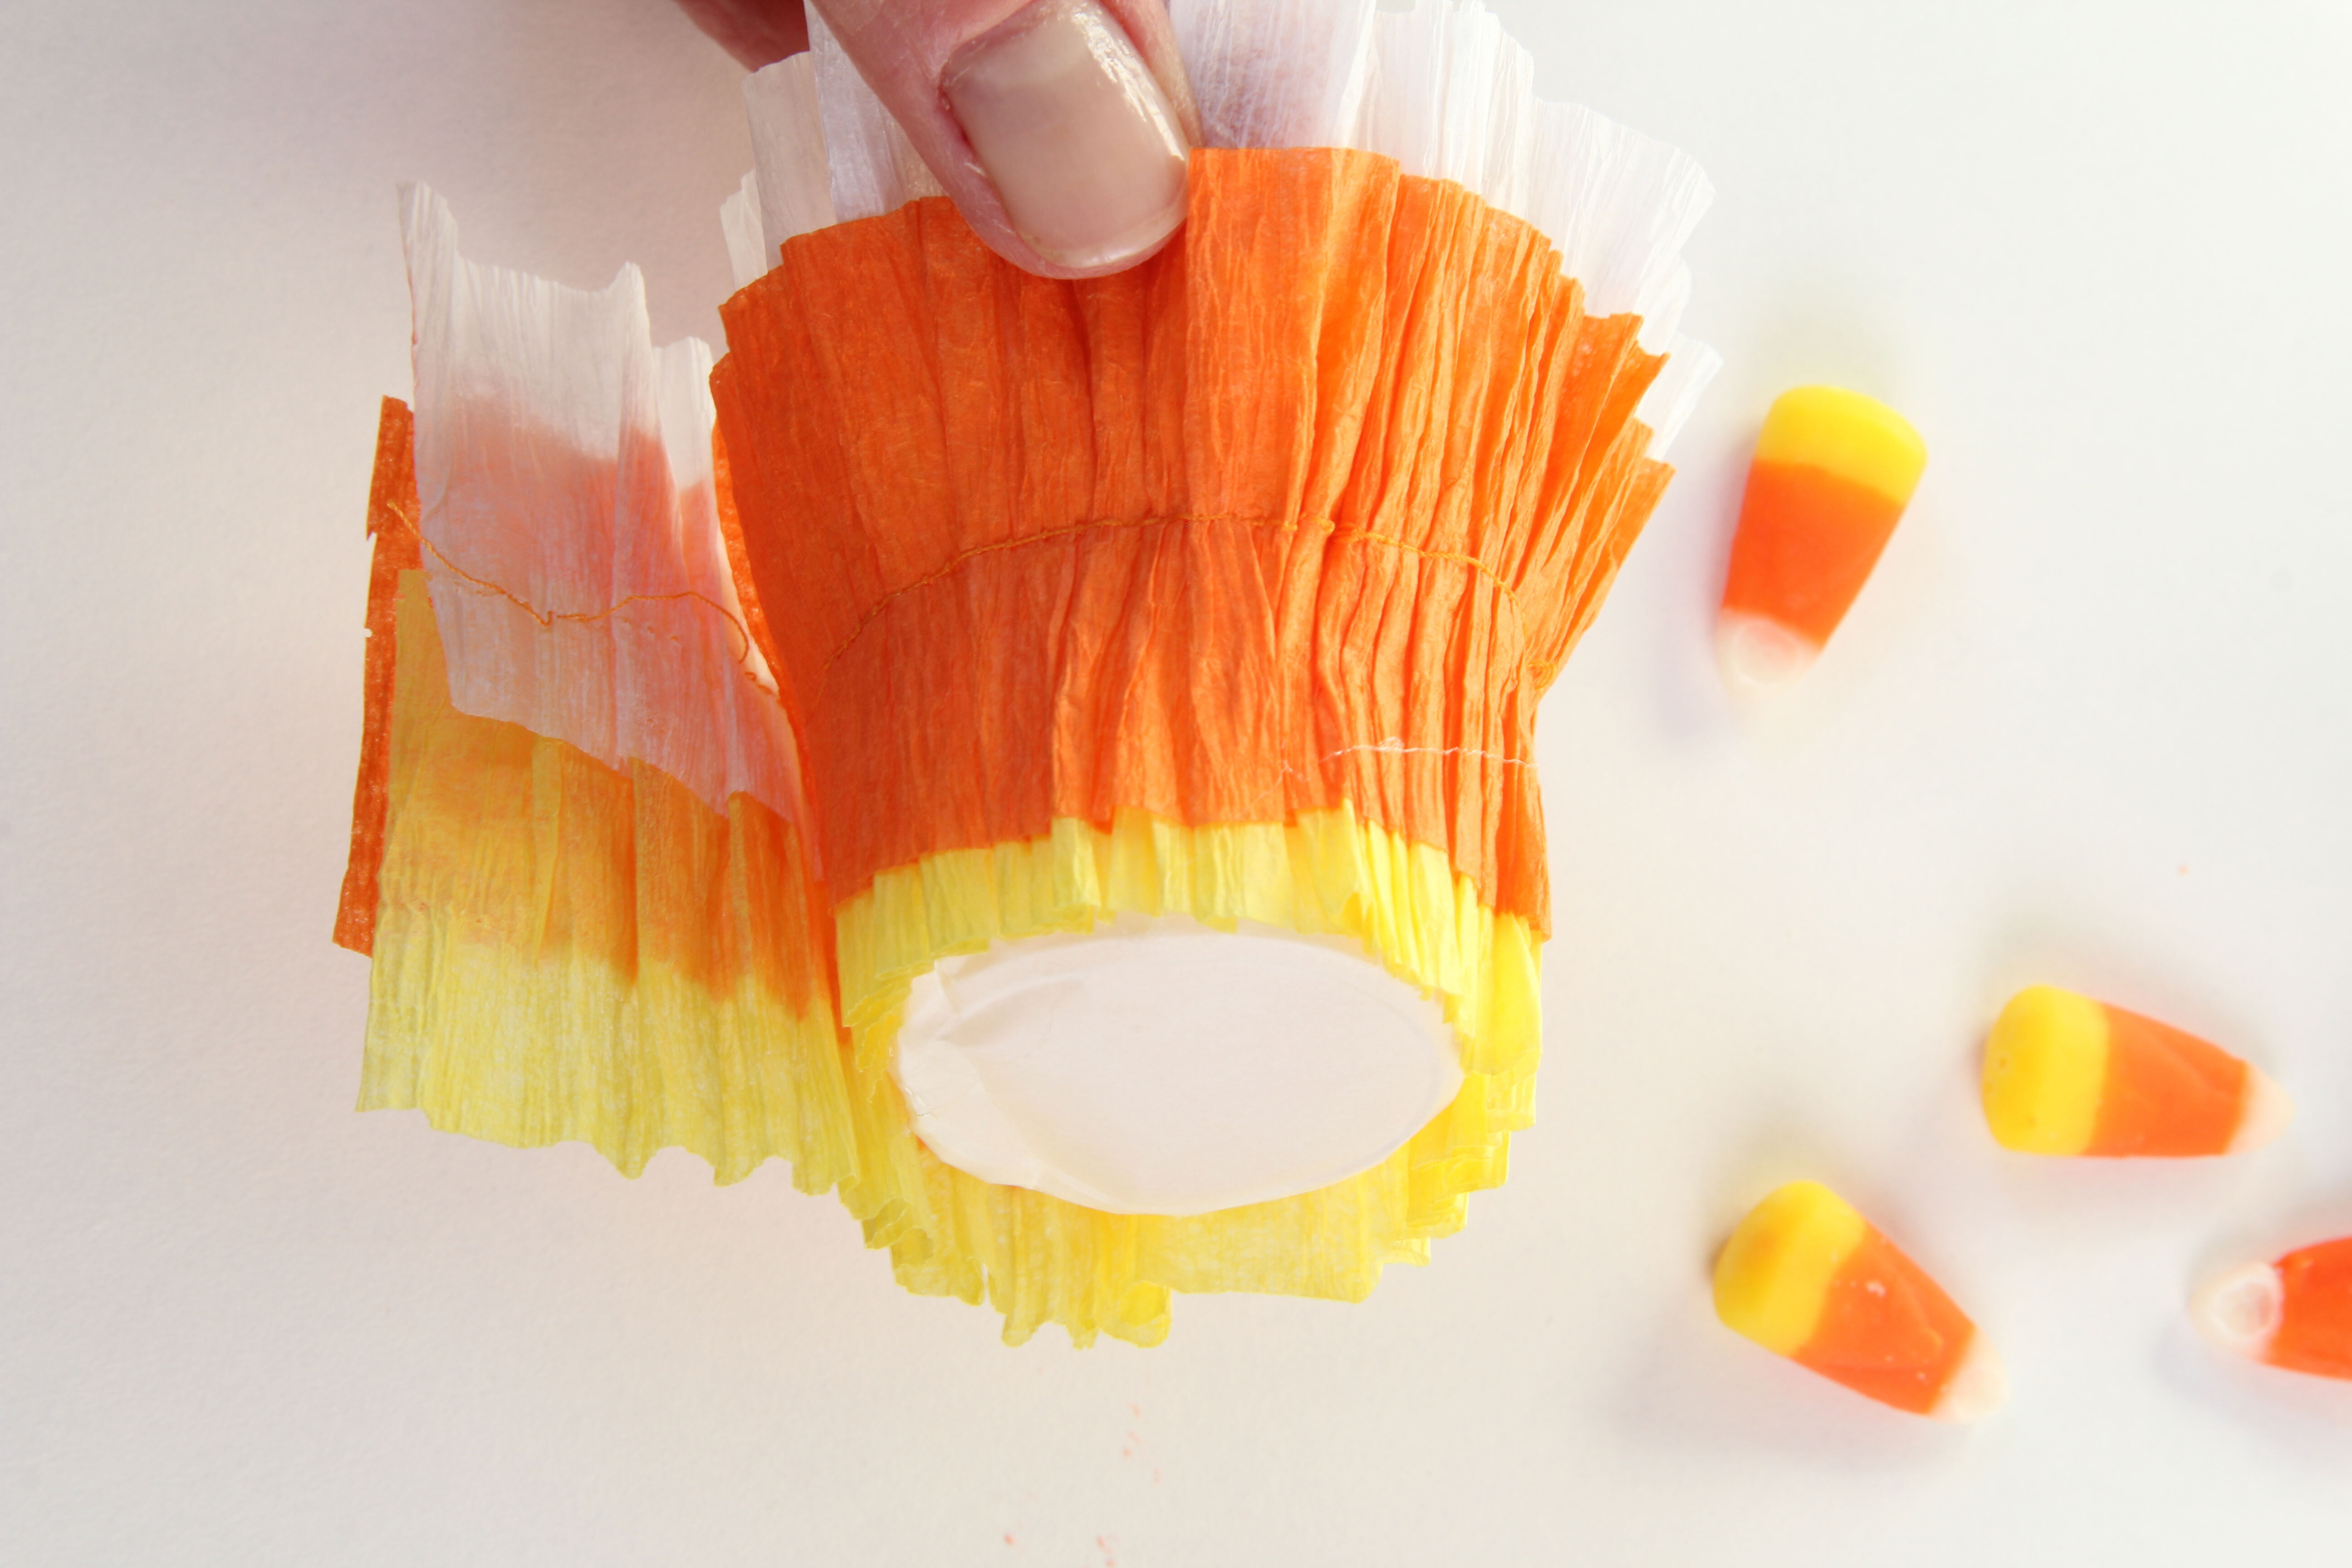 Assemble the DIY candy Corn Baskets with a hot glue gun. Wrap the sewed crepe paper to the cup and glue down. Super easy and Fun to make!